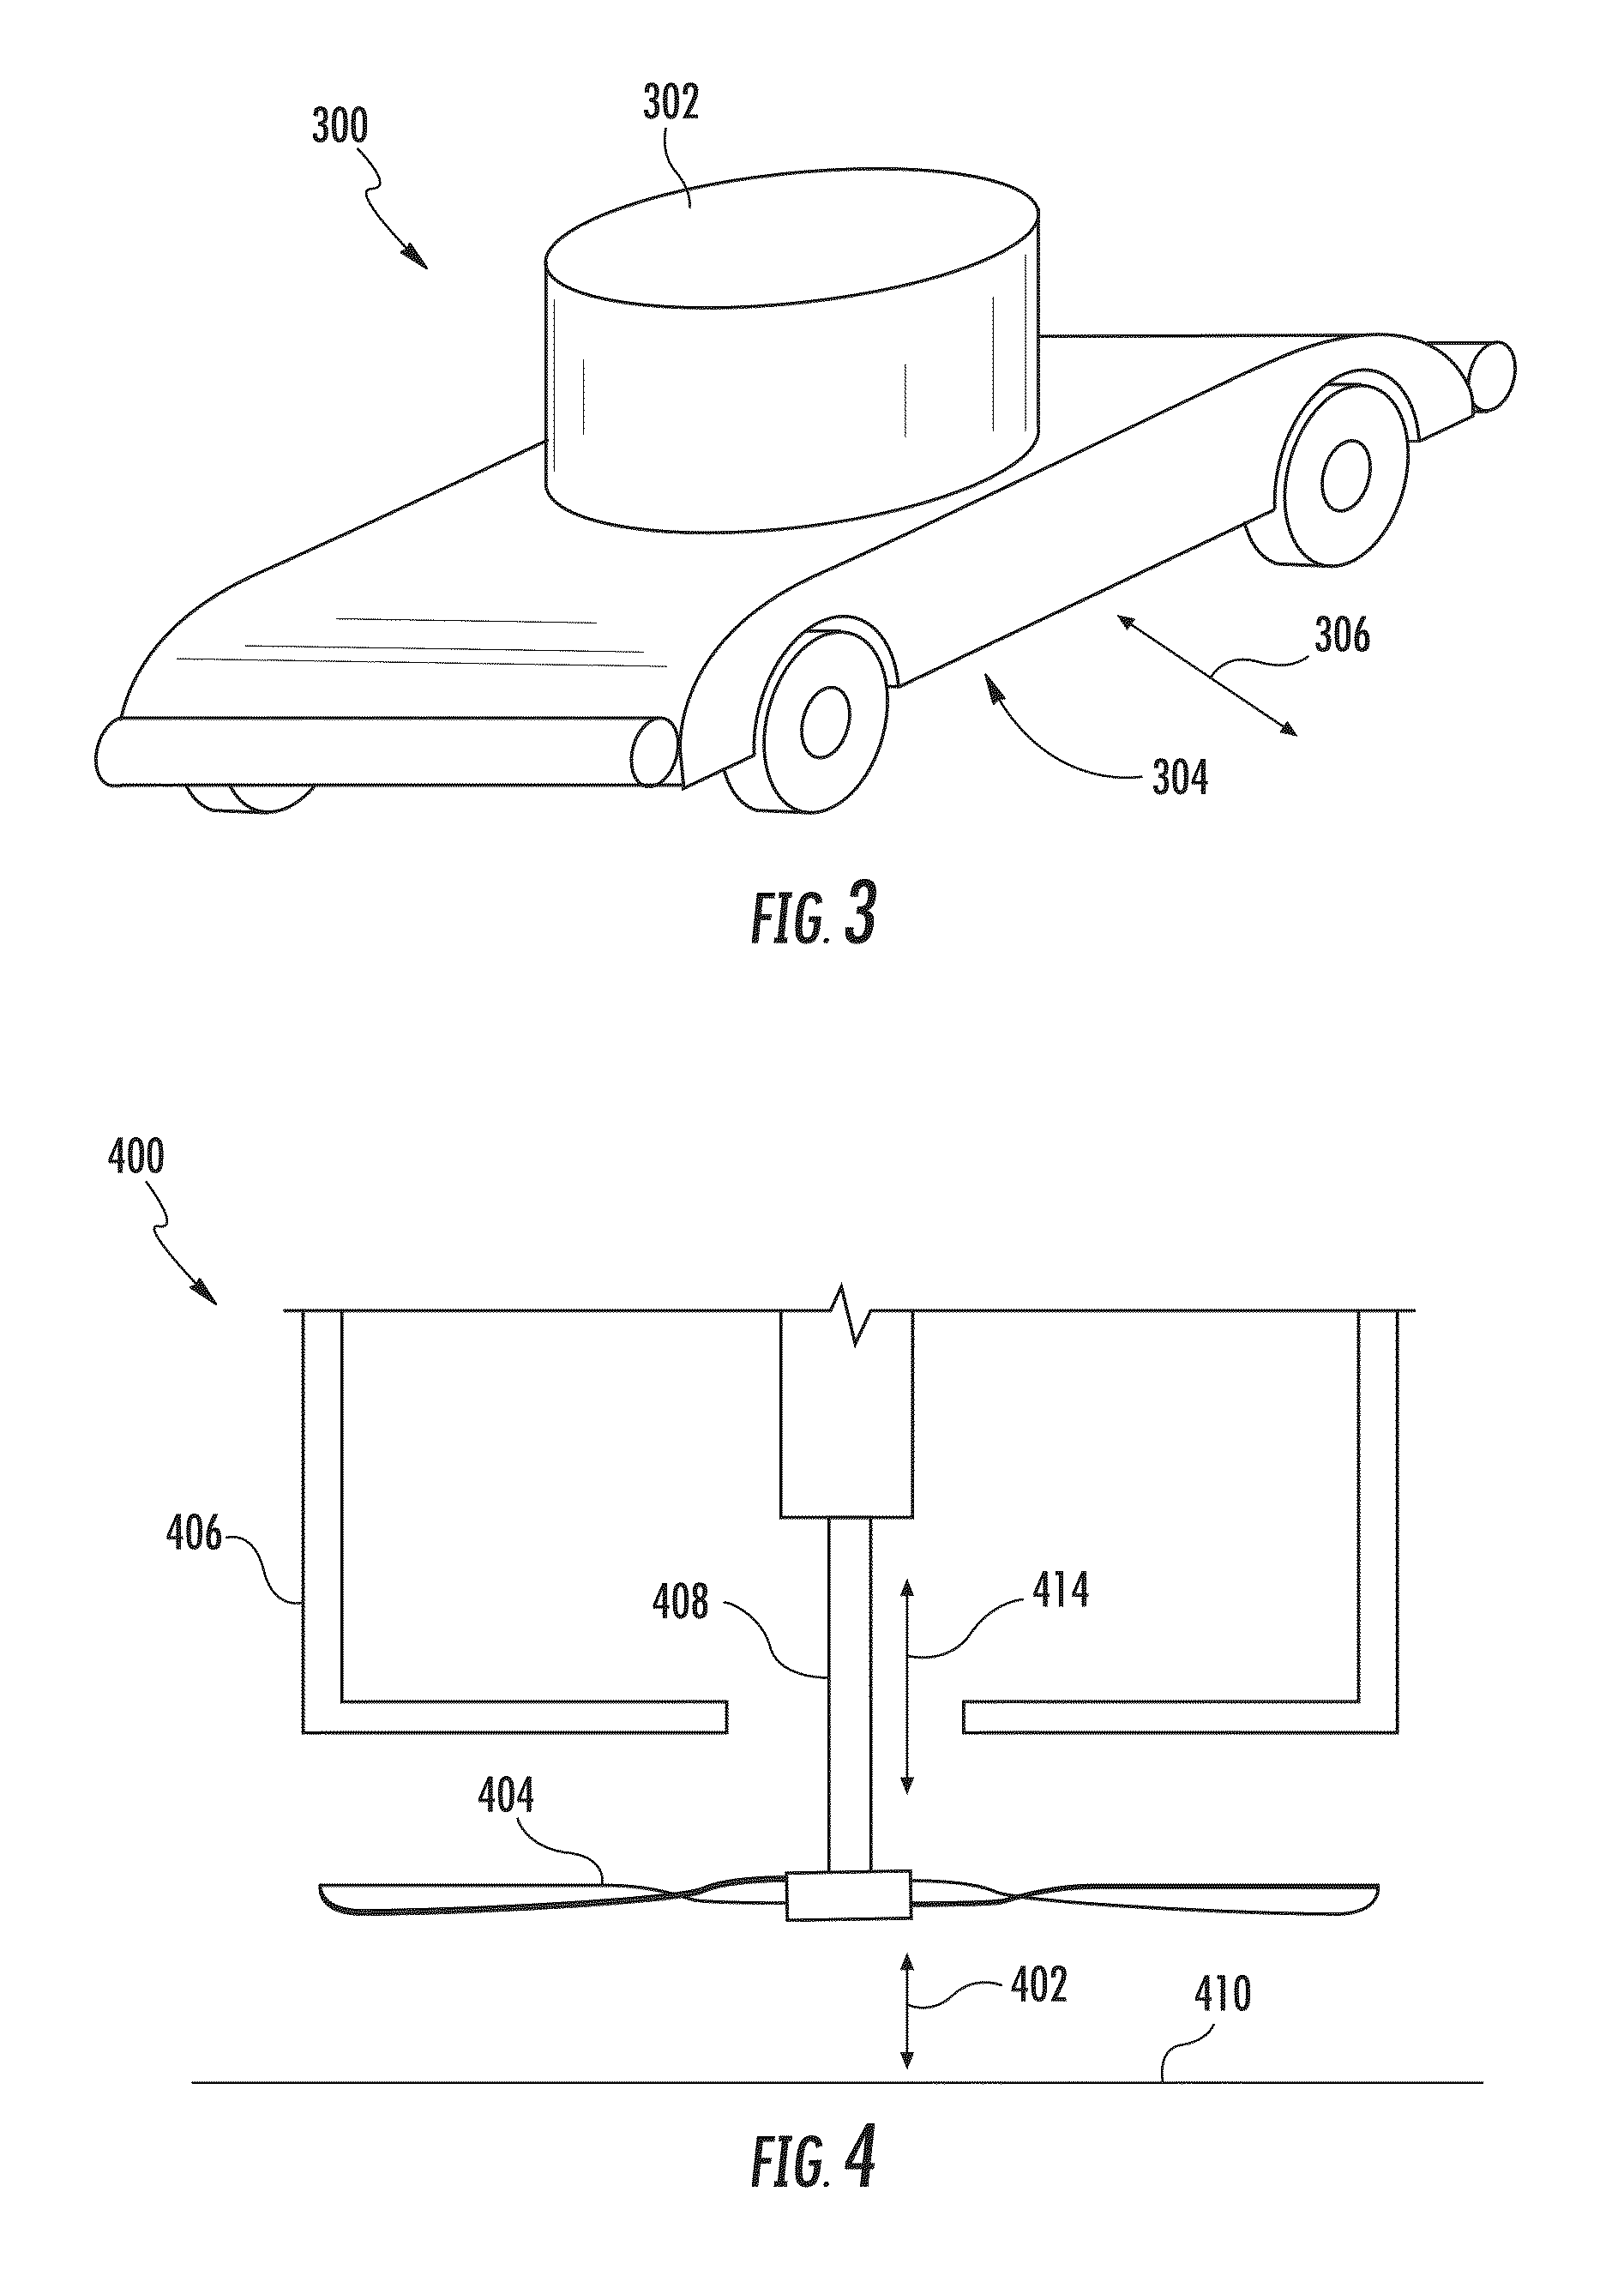 Computerized learning landscaping apparatus and methods